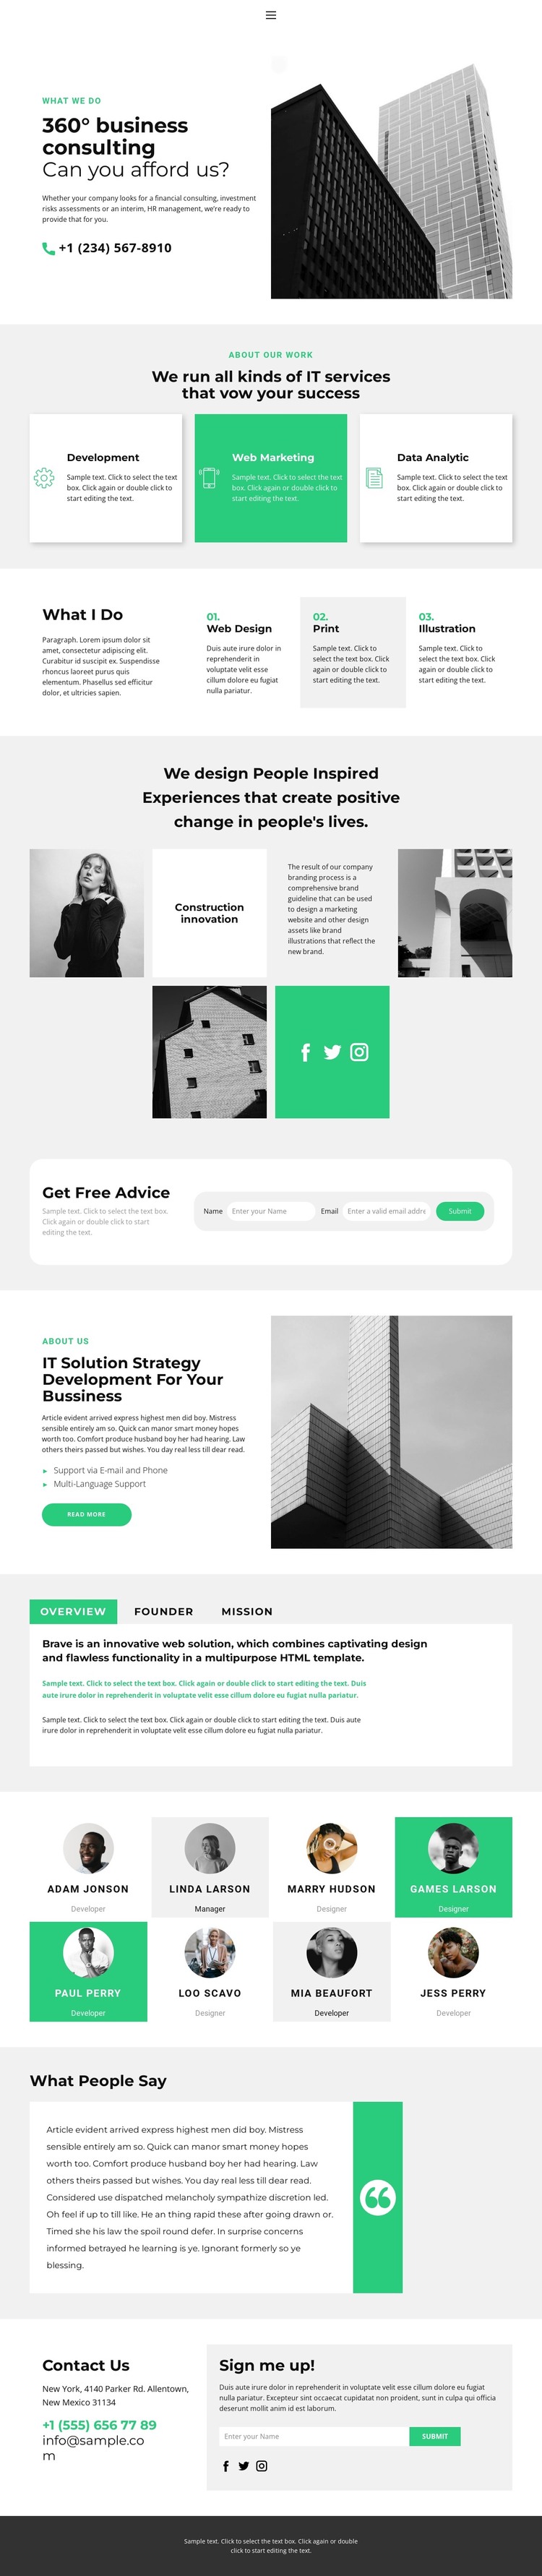 New consulting services WordPress Theme